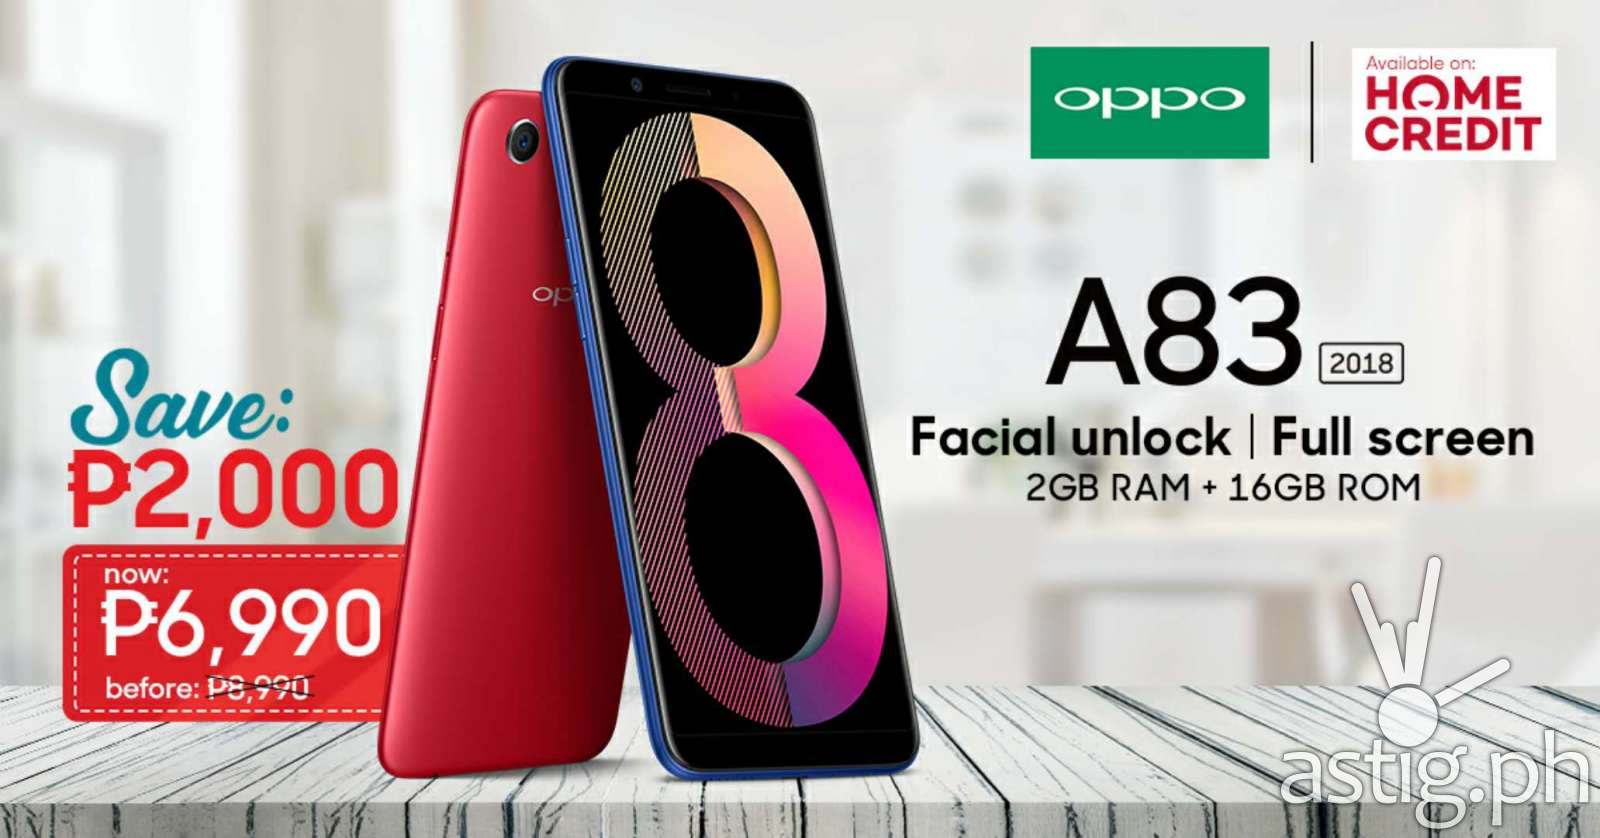 OPPO A83 price drop